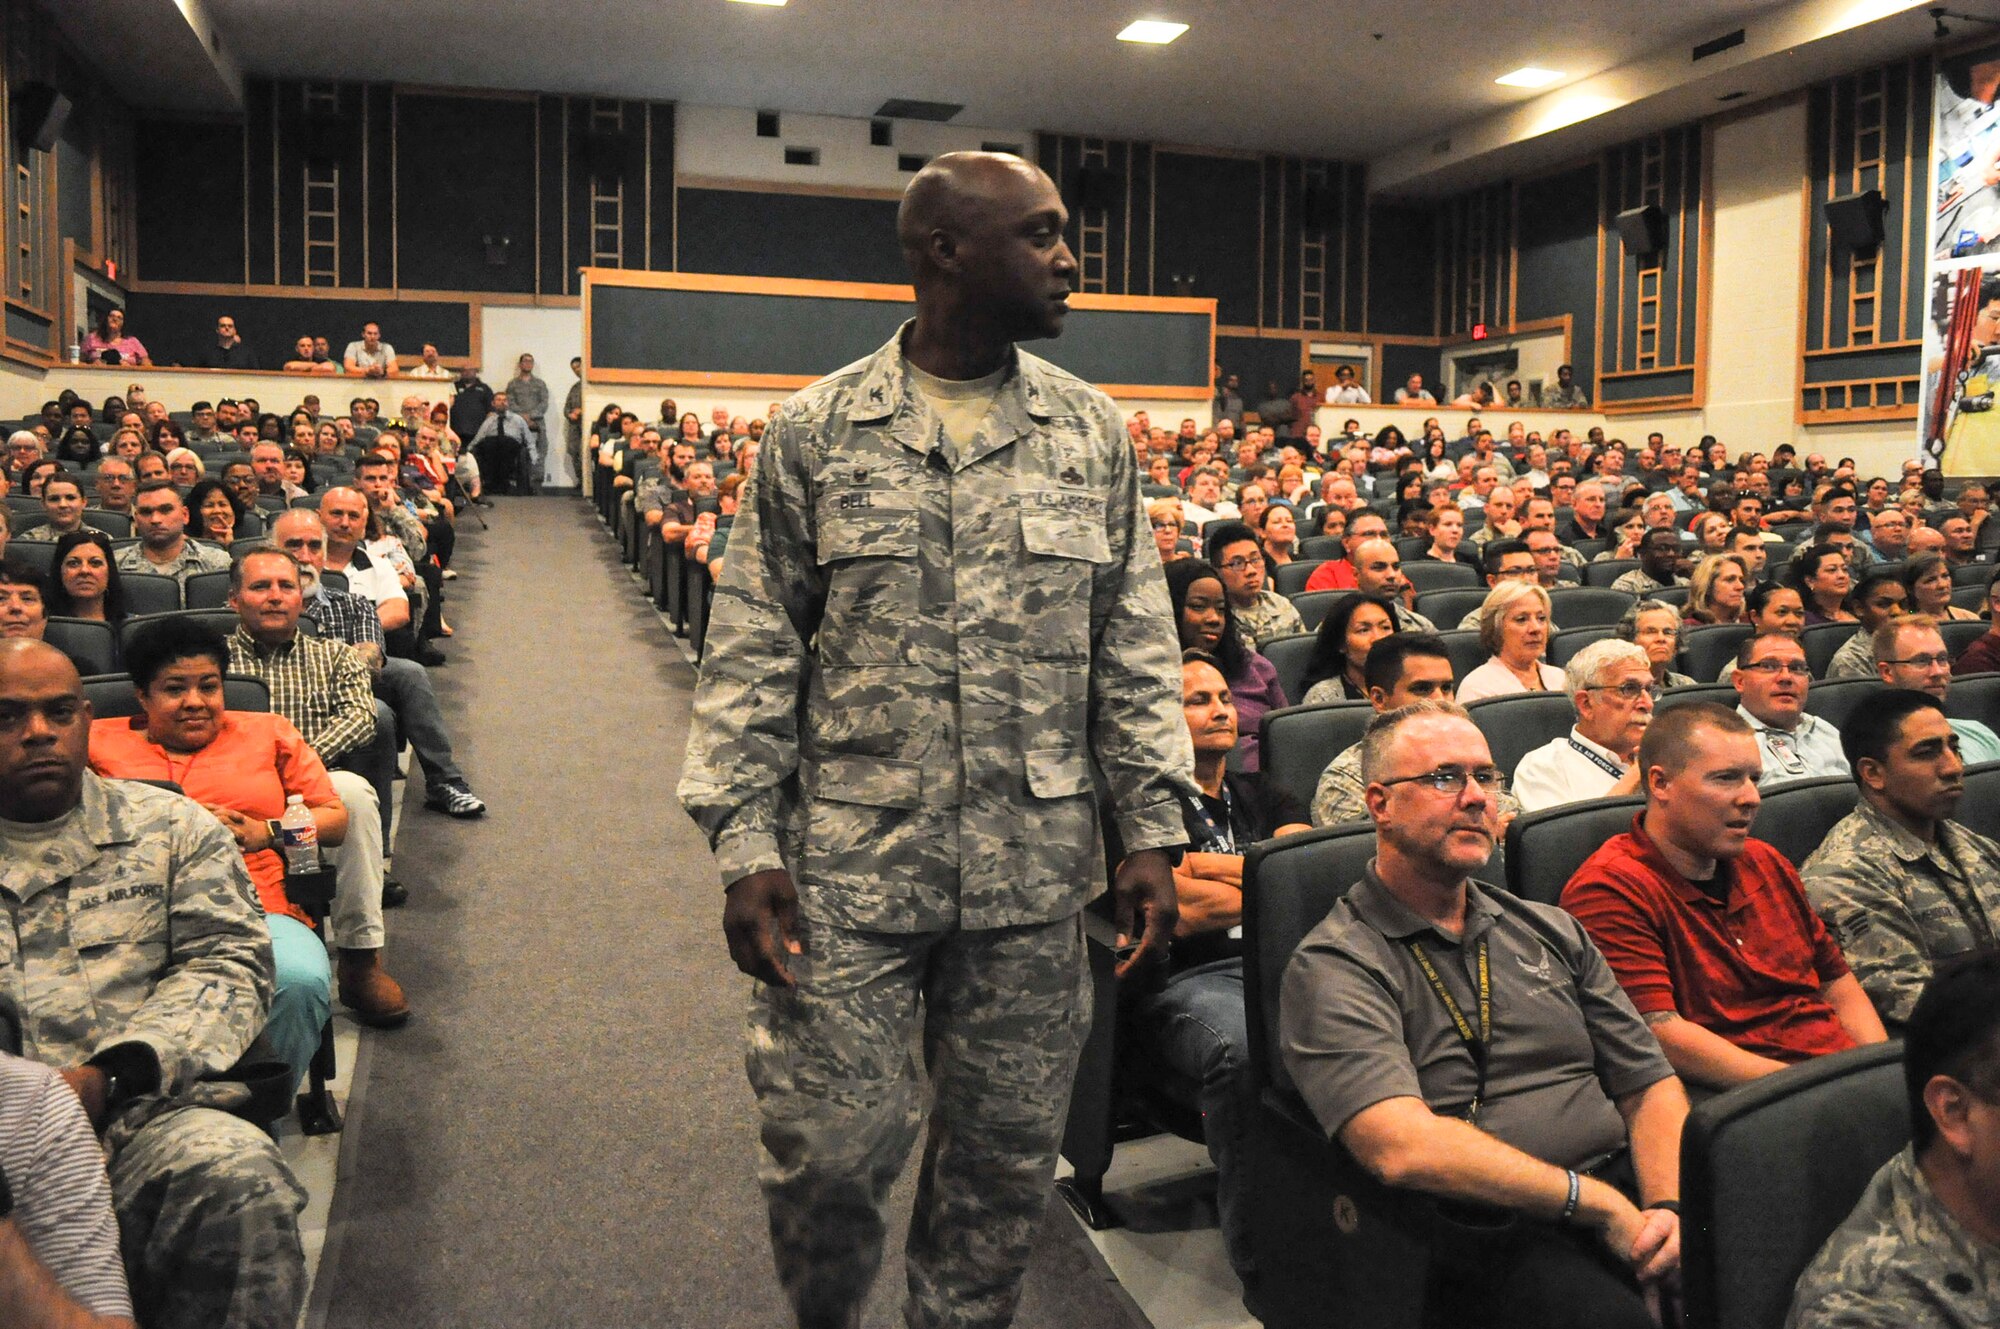 Col. Kenyon Bell held his first Commander’s Call for the 72nd Air Base Wing Aug. 16 in the Tinker Auditorium.